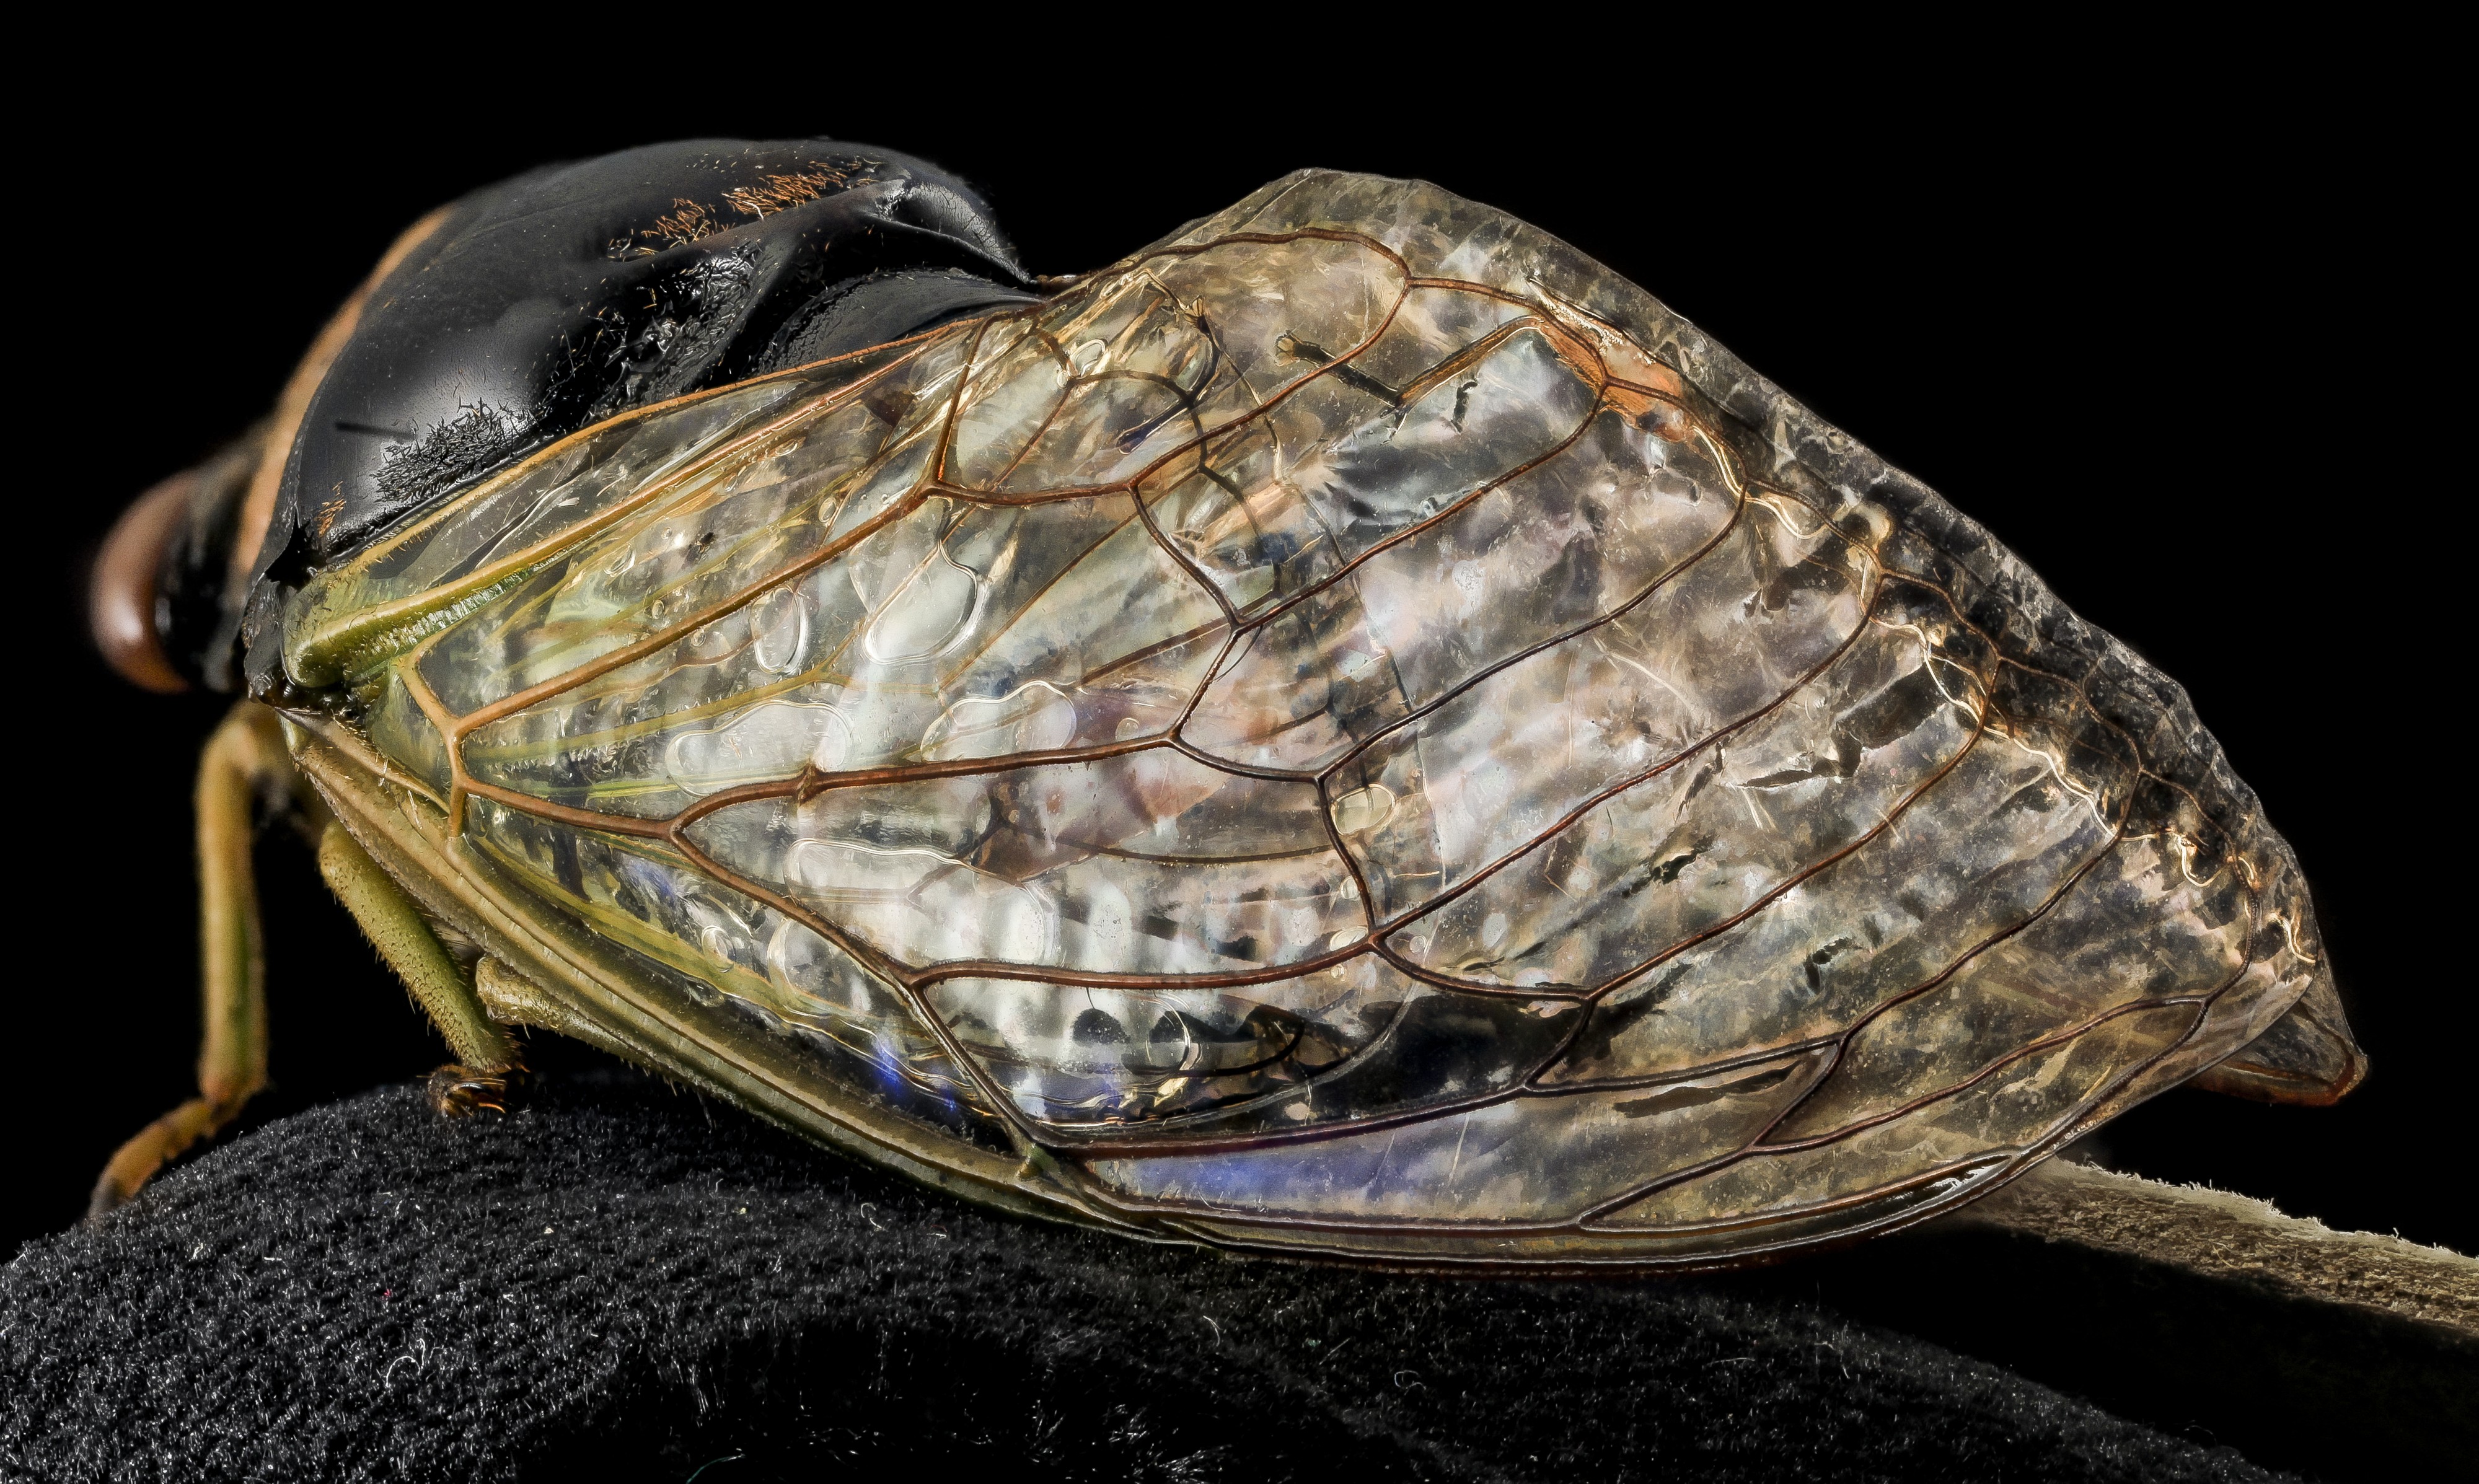 Stained Glass Cicada wings, U, wings 1, Bent Creek EF, NC 2014-01-17-16.16.33 ZS PMax (12017901955)